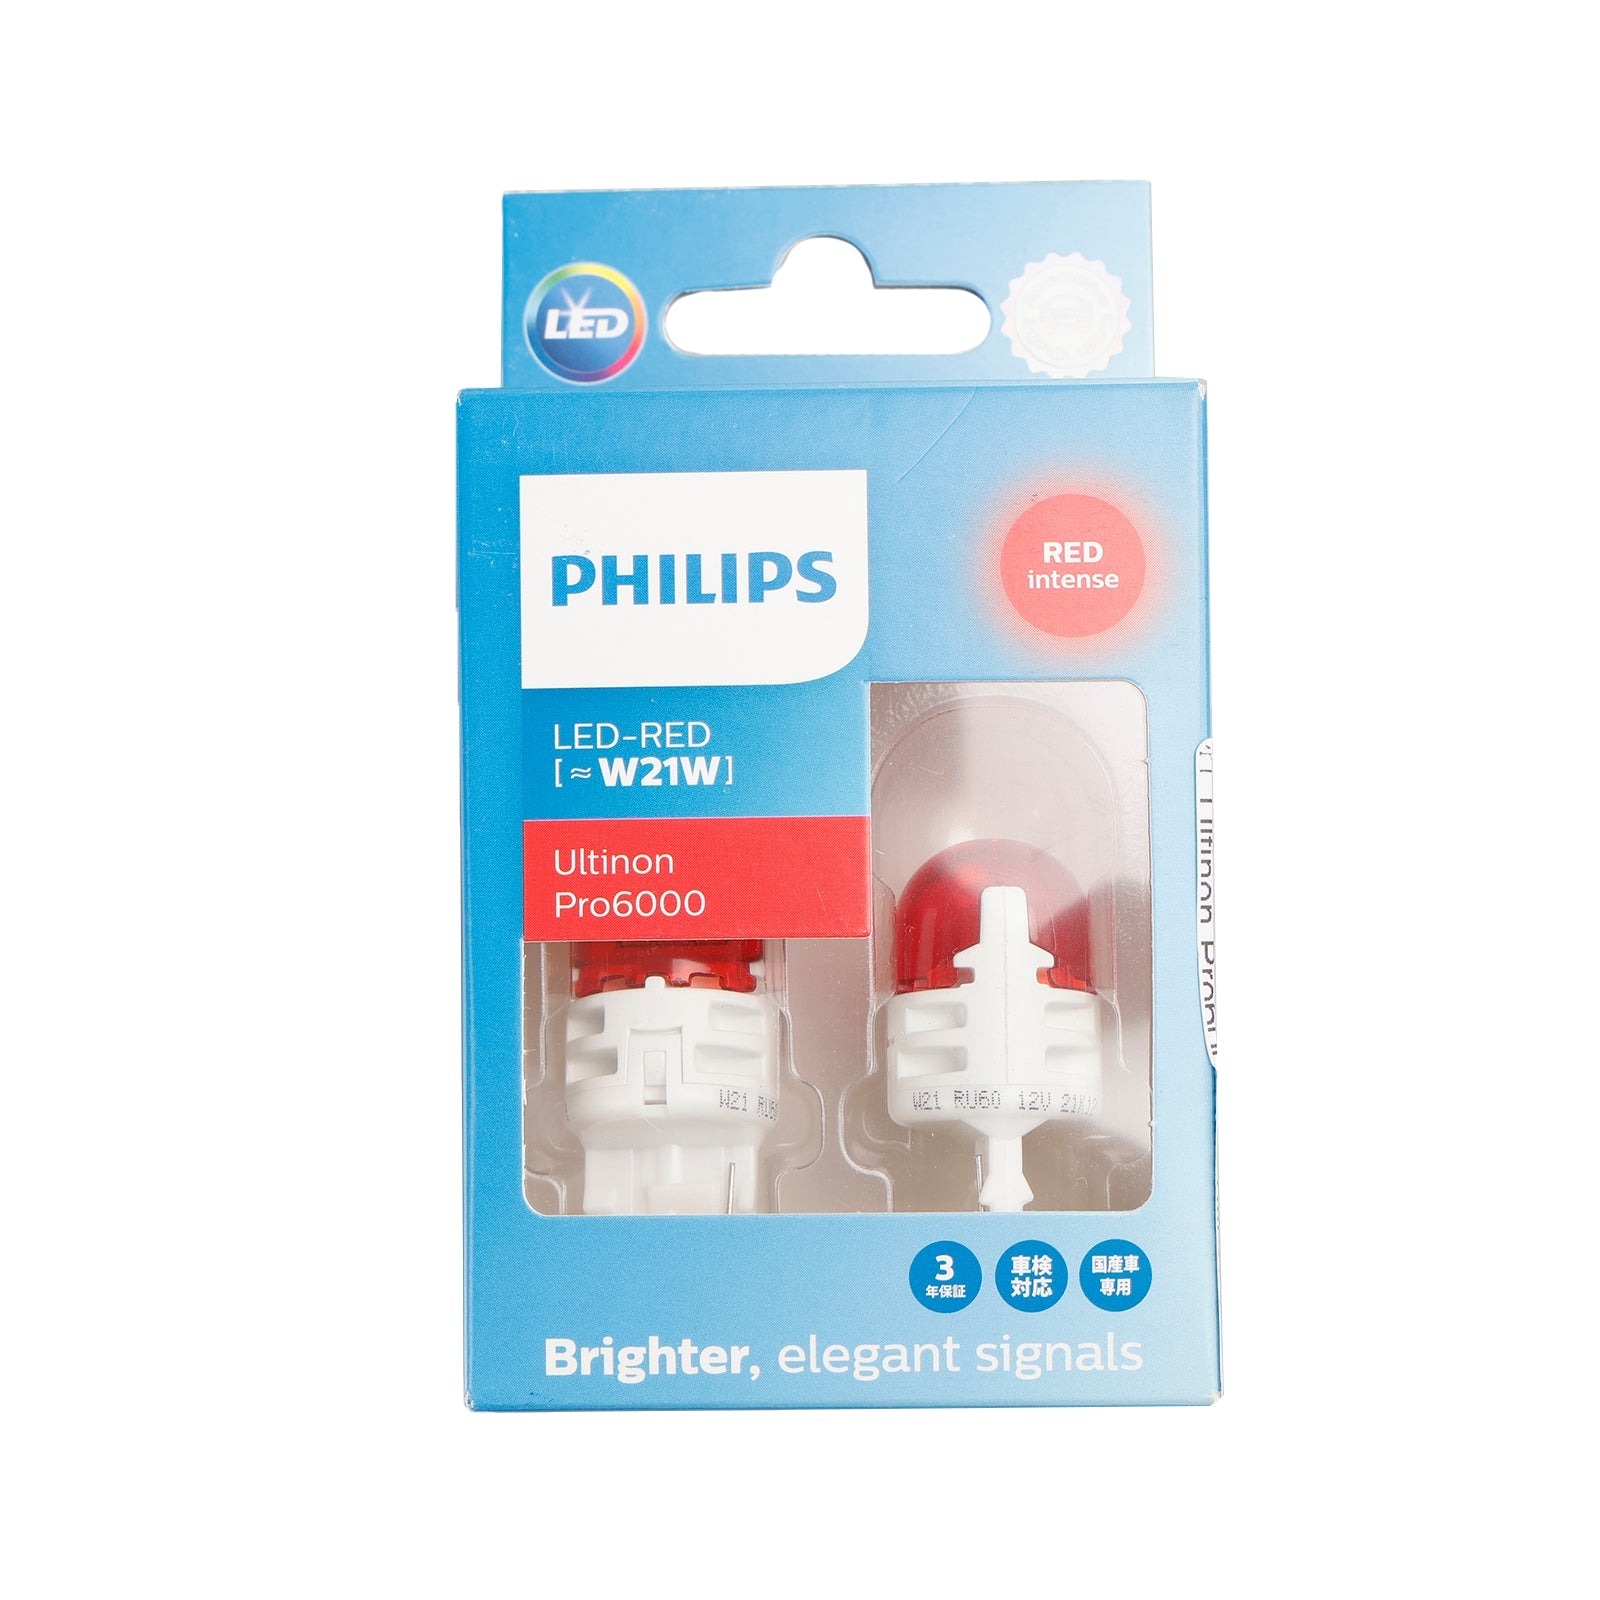 Pour Philips 11065RU60X2 Ultinon Pro6000 LED-ROUGE W21W Rouge intense 75lm